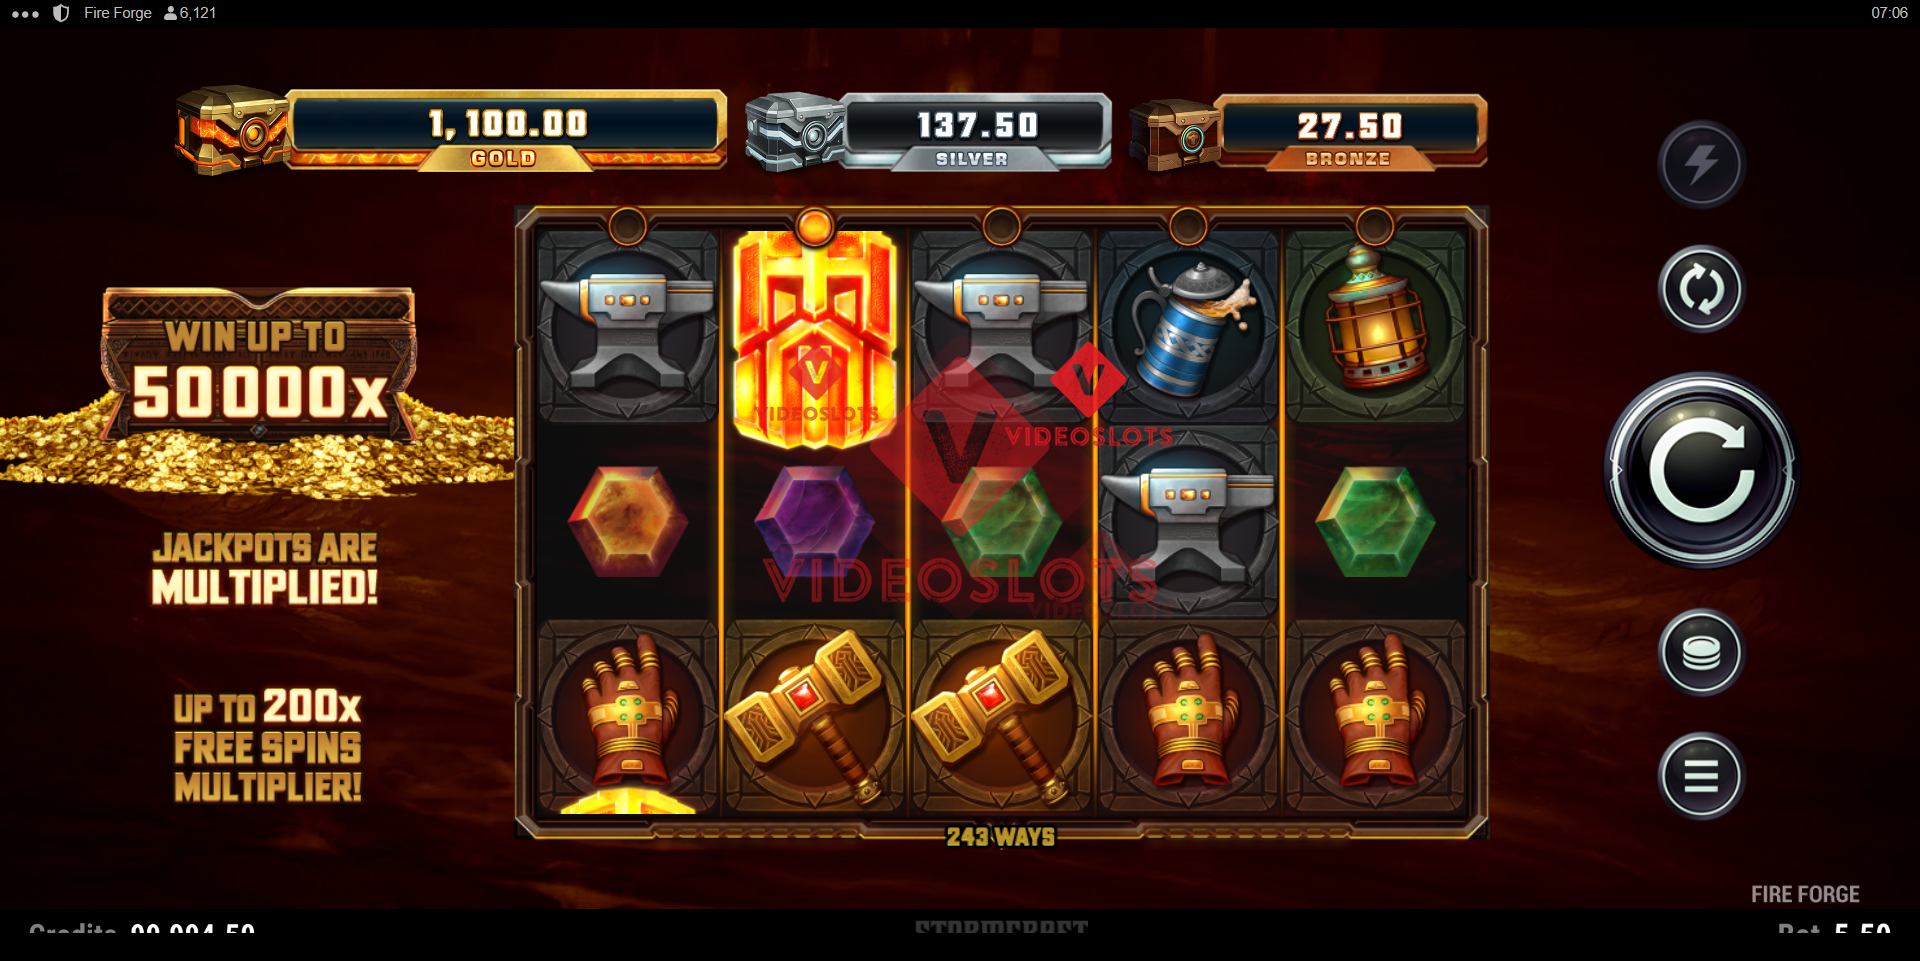 Base Game for Fire Forge slot for Microgaming